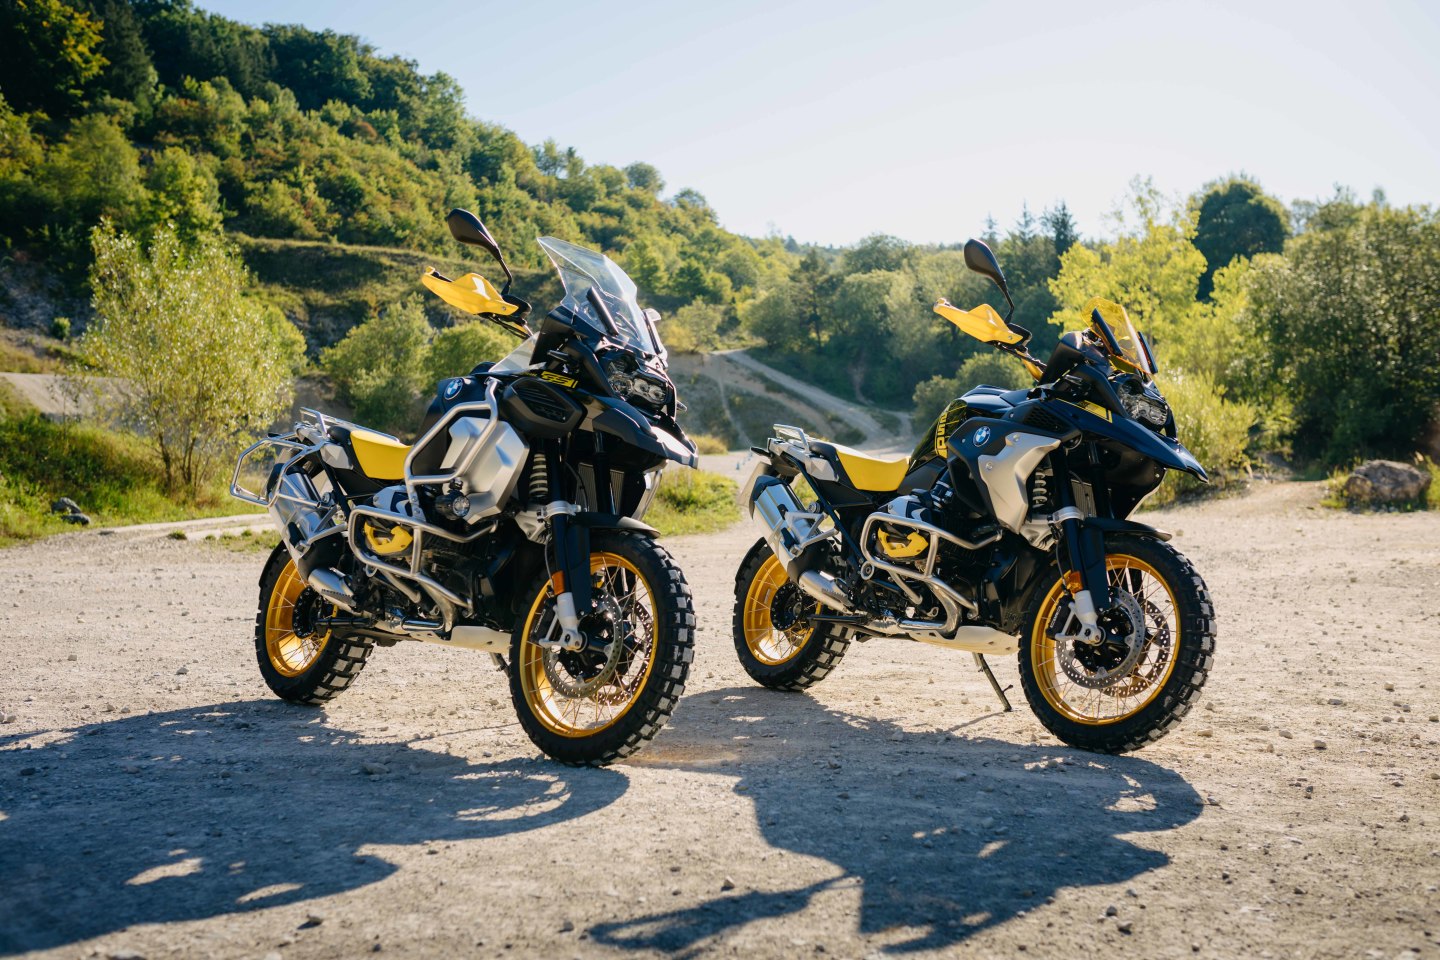 The R1250GS (right), an enormous bike, and the R1250GS Adventure (left), even bigger and with more crash bars